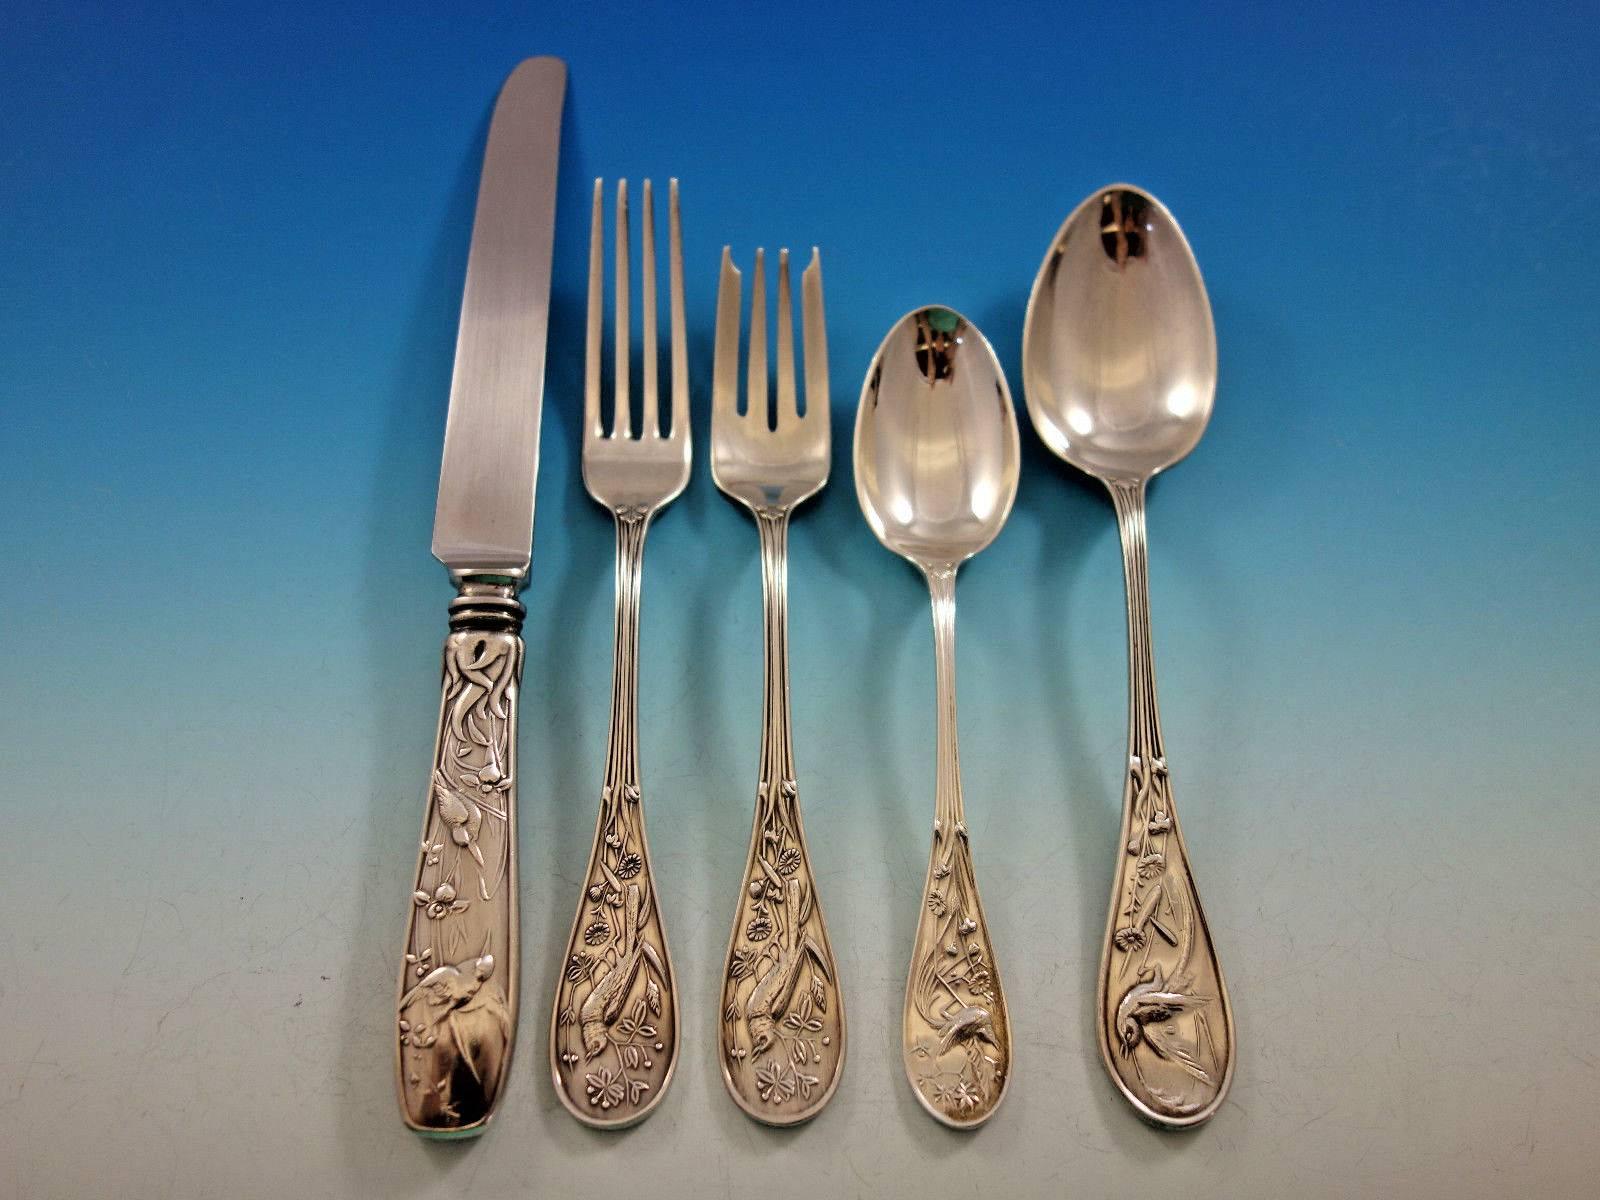 Audubon by Tiffany & Co. sterling silver flatware set of 20 pieces with wonderful pattern detail. Great starter set! This set includes: Four knives, 9 1/4